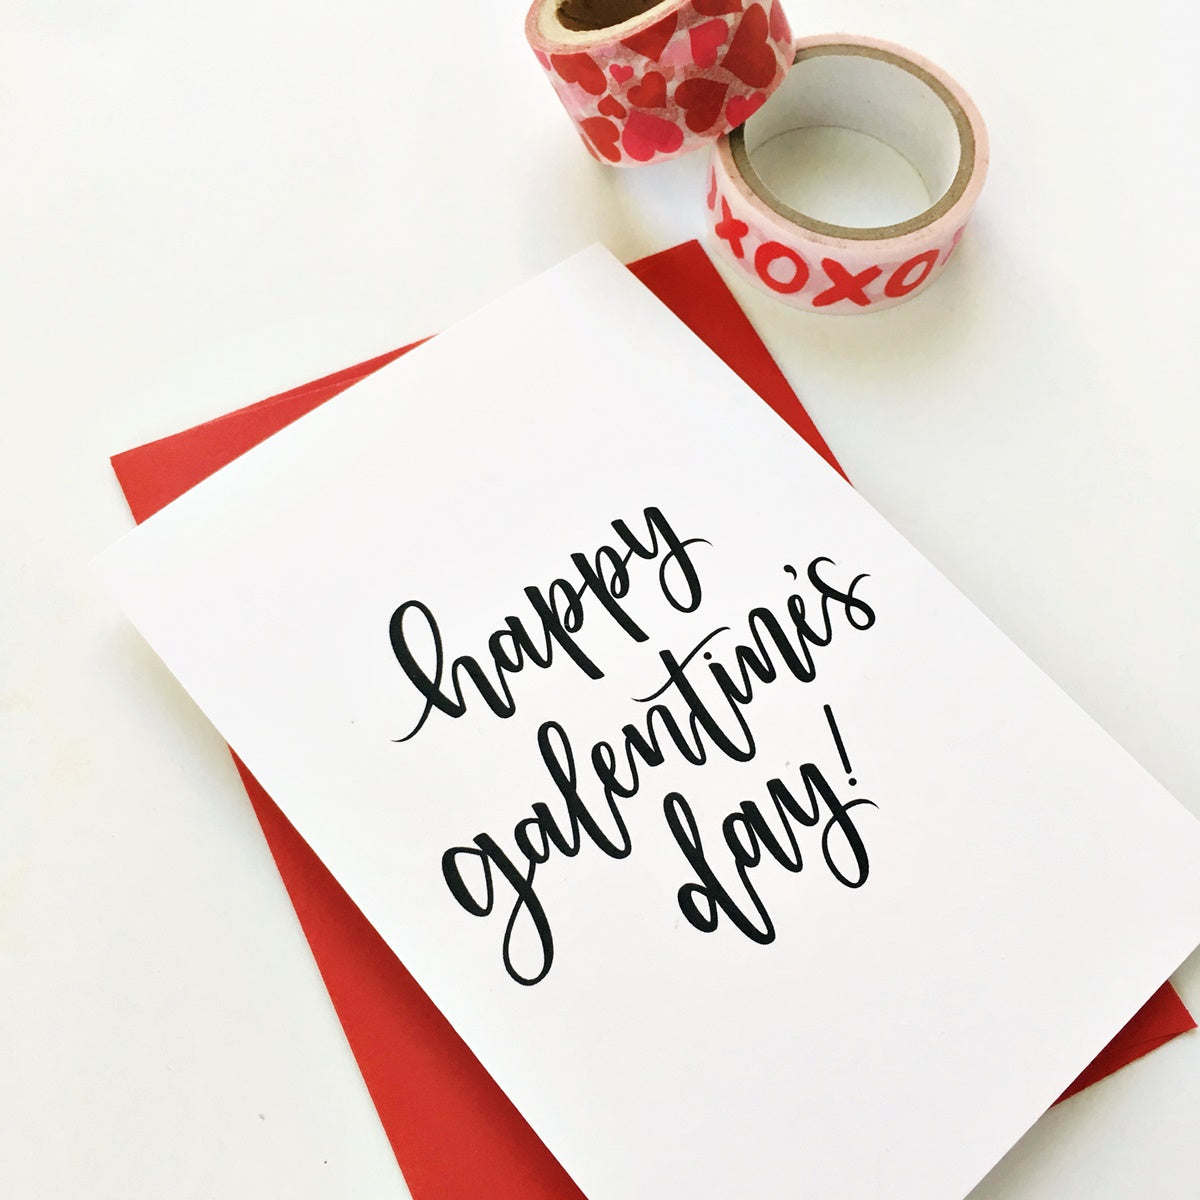 Happy Galentine's Day Calligraphy Card, A1 Mini Card, Set of 5